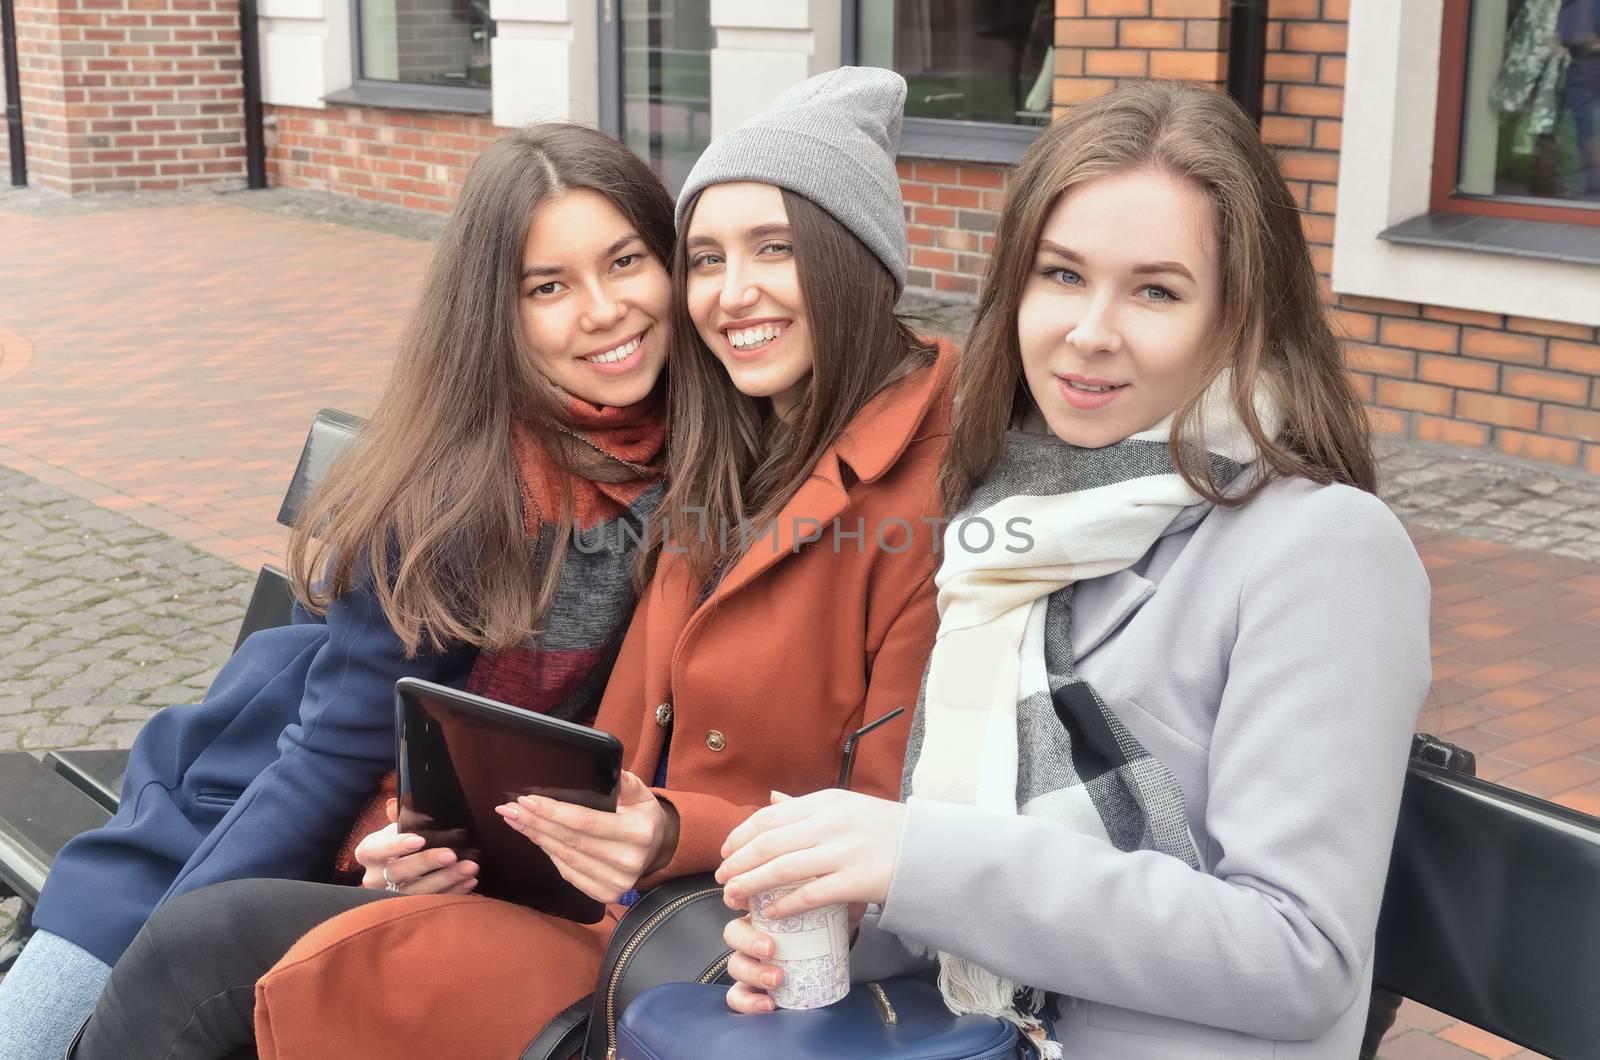 Three girls sit on the bench, holding a tablet and coffee in their hands. Looking at the photographer, smiling